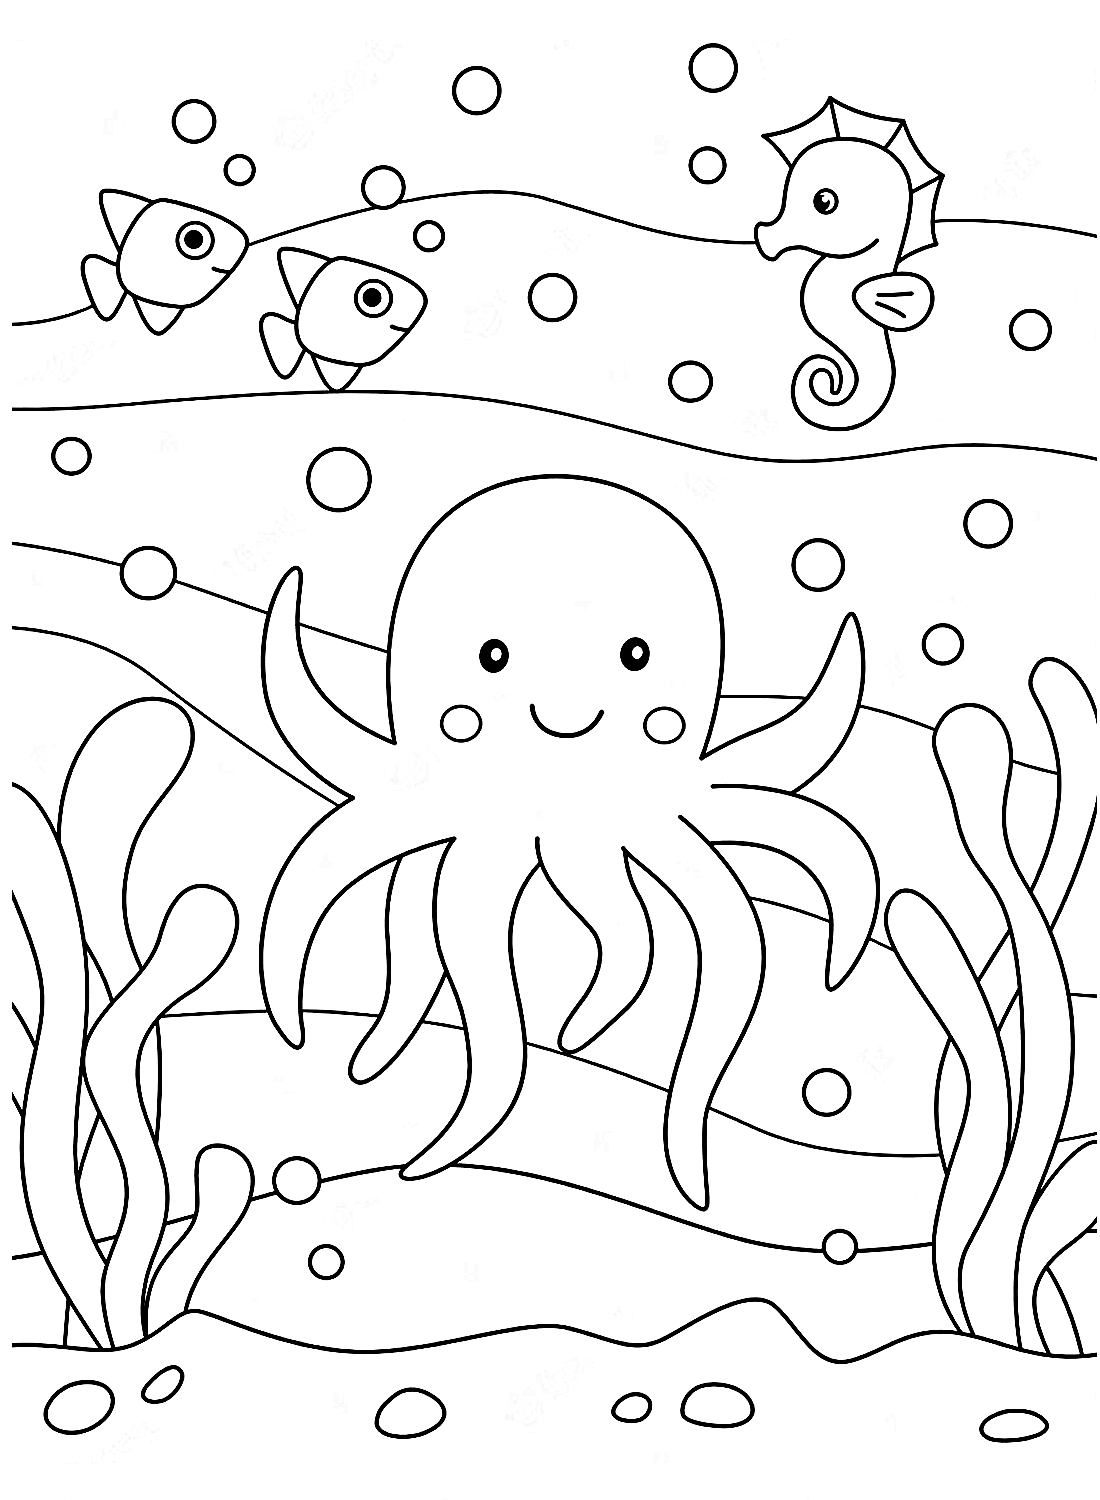 The Jellyfish and the ocean Coloring Page